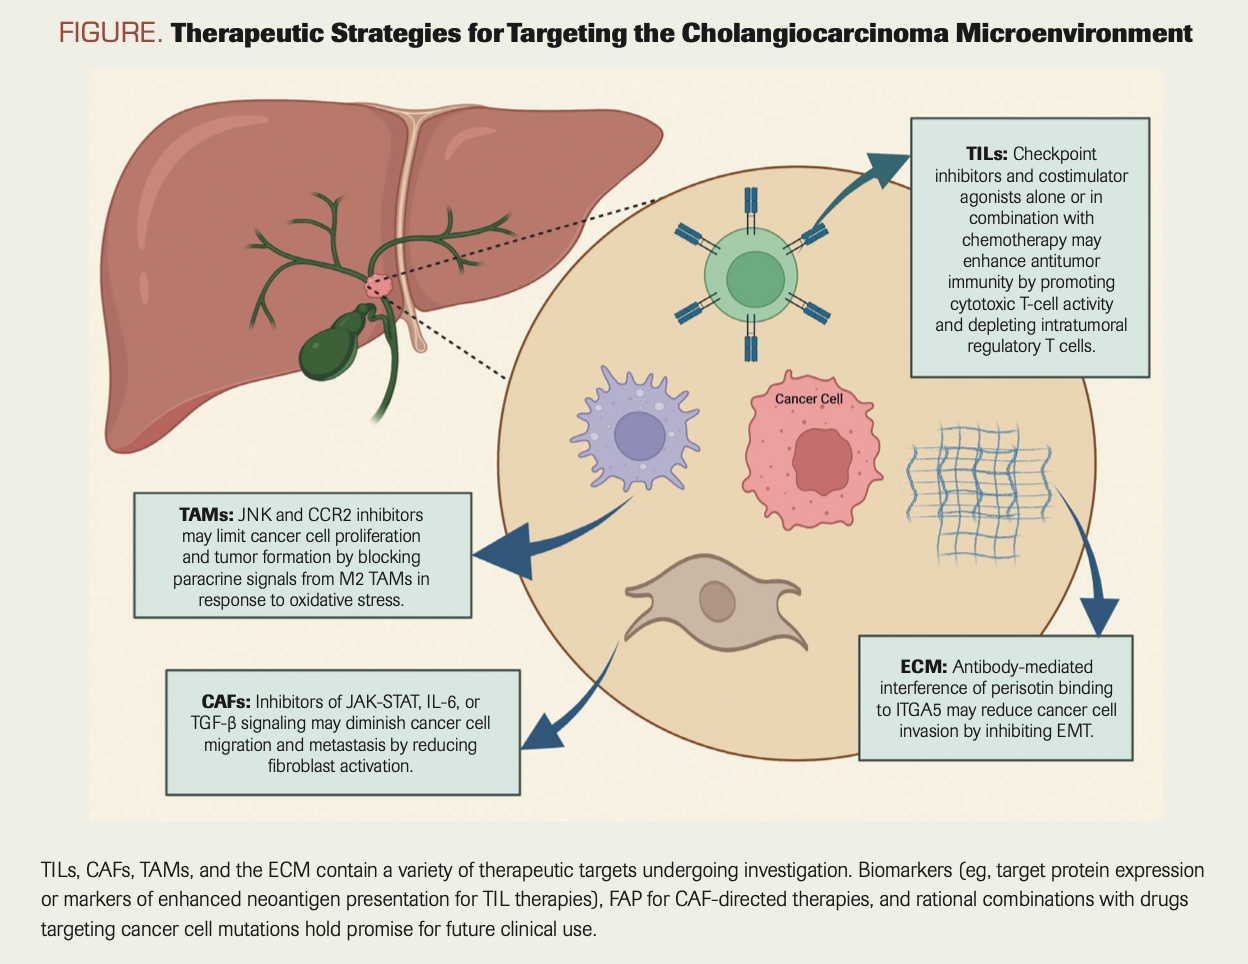 FIGURE. Therapeutic Strategies for Targeting the Cholangiocarcinoma Microenvironment